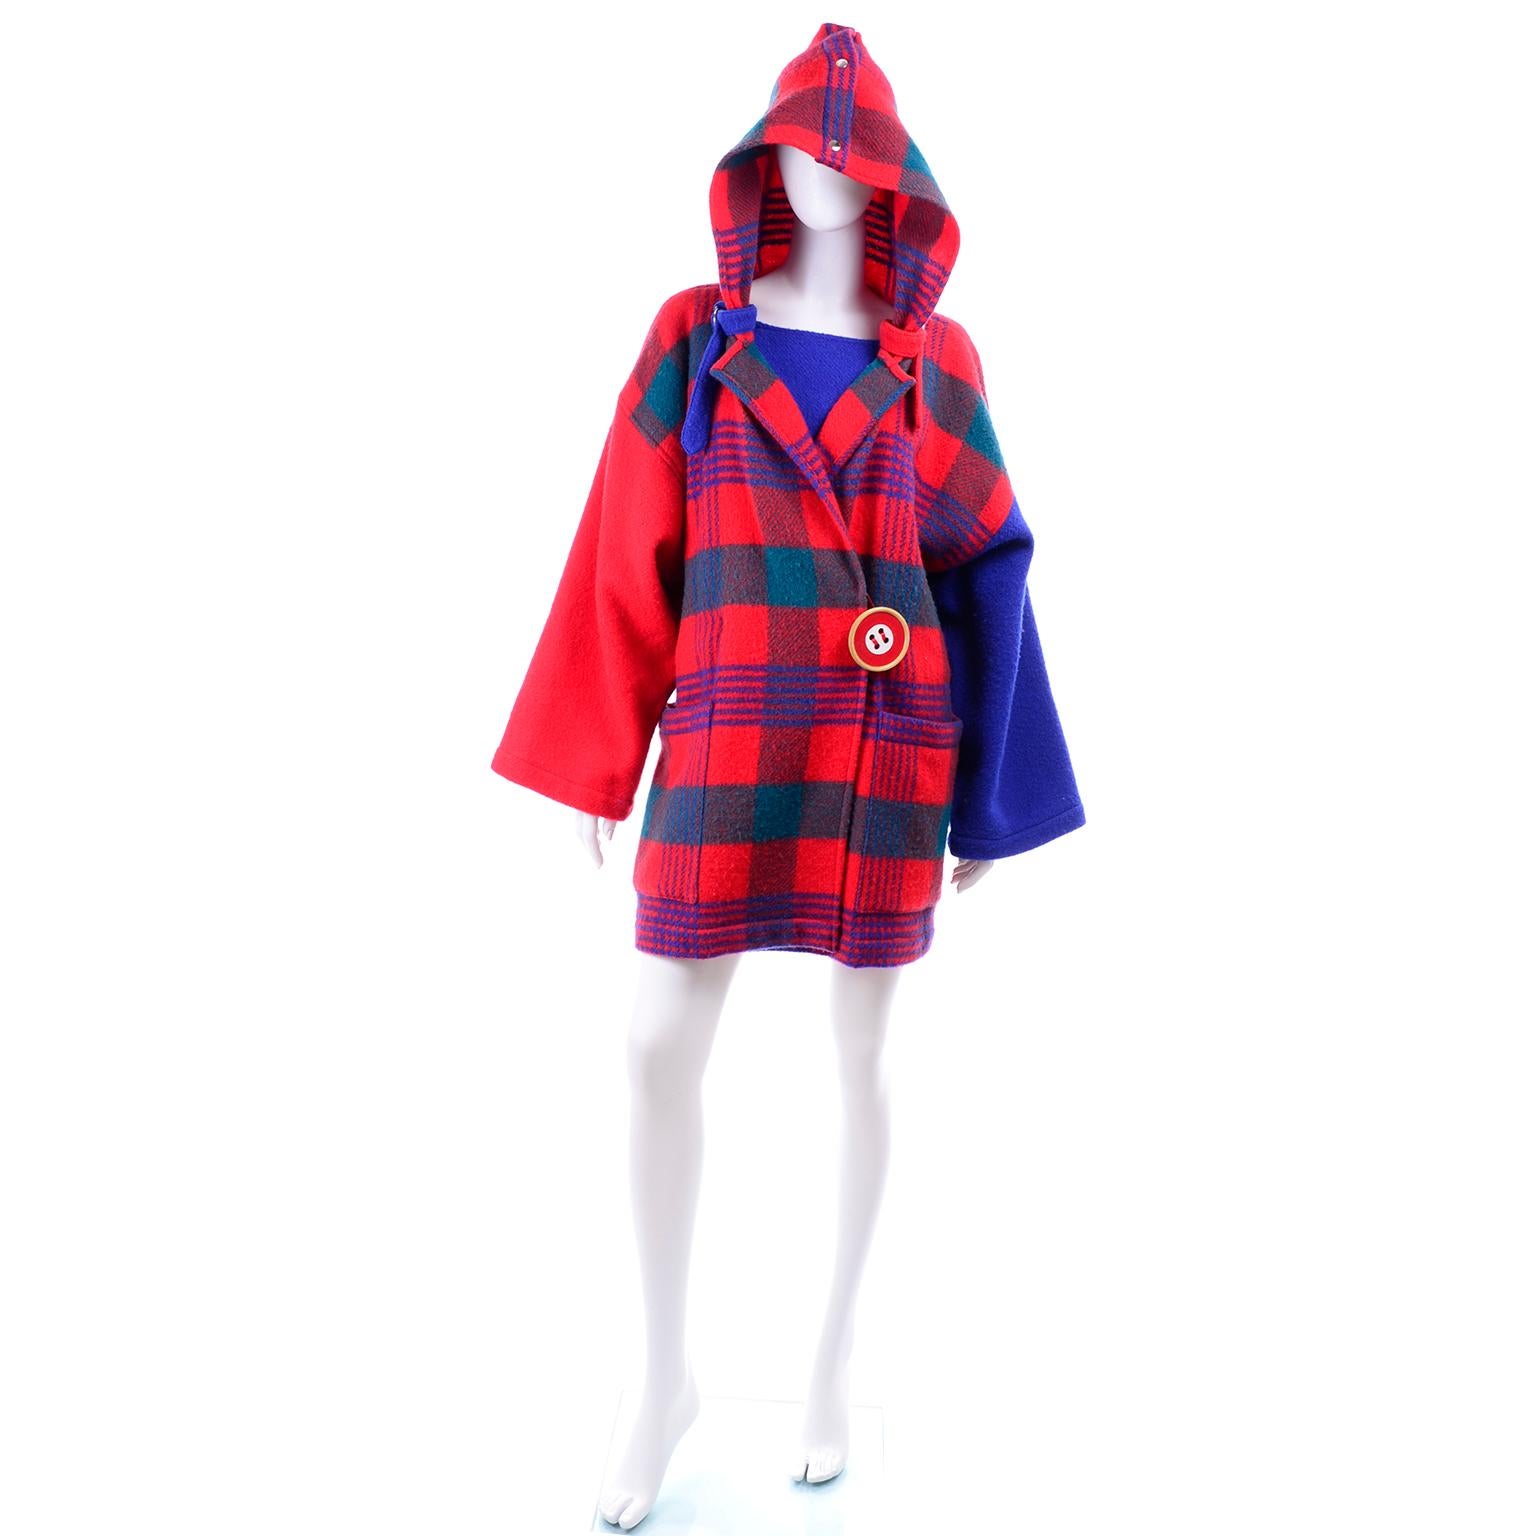 This vintage coat was designed by Jean Charles de Castelbajac in the 1980's and was sold at Bergdorf Goodman.  The coat is in a beautiful red and blue plaid wool and has a fabulous 3